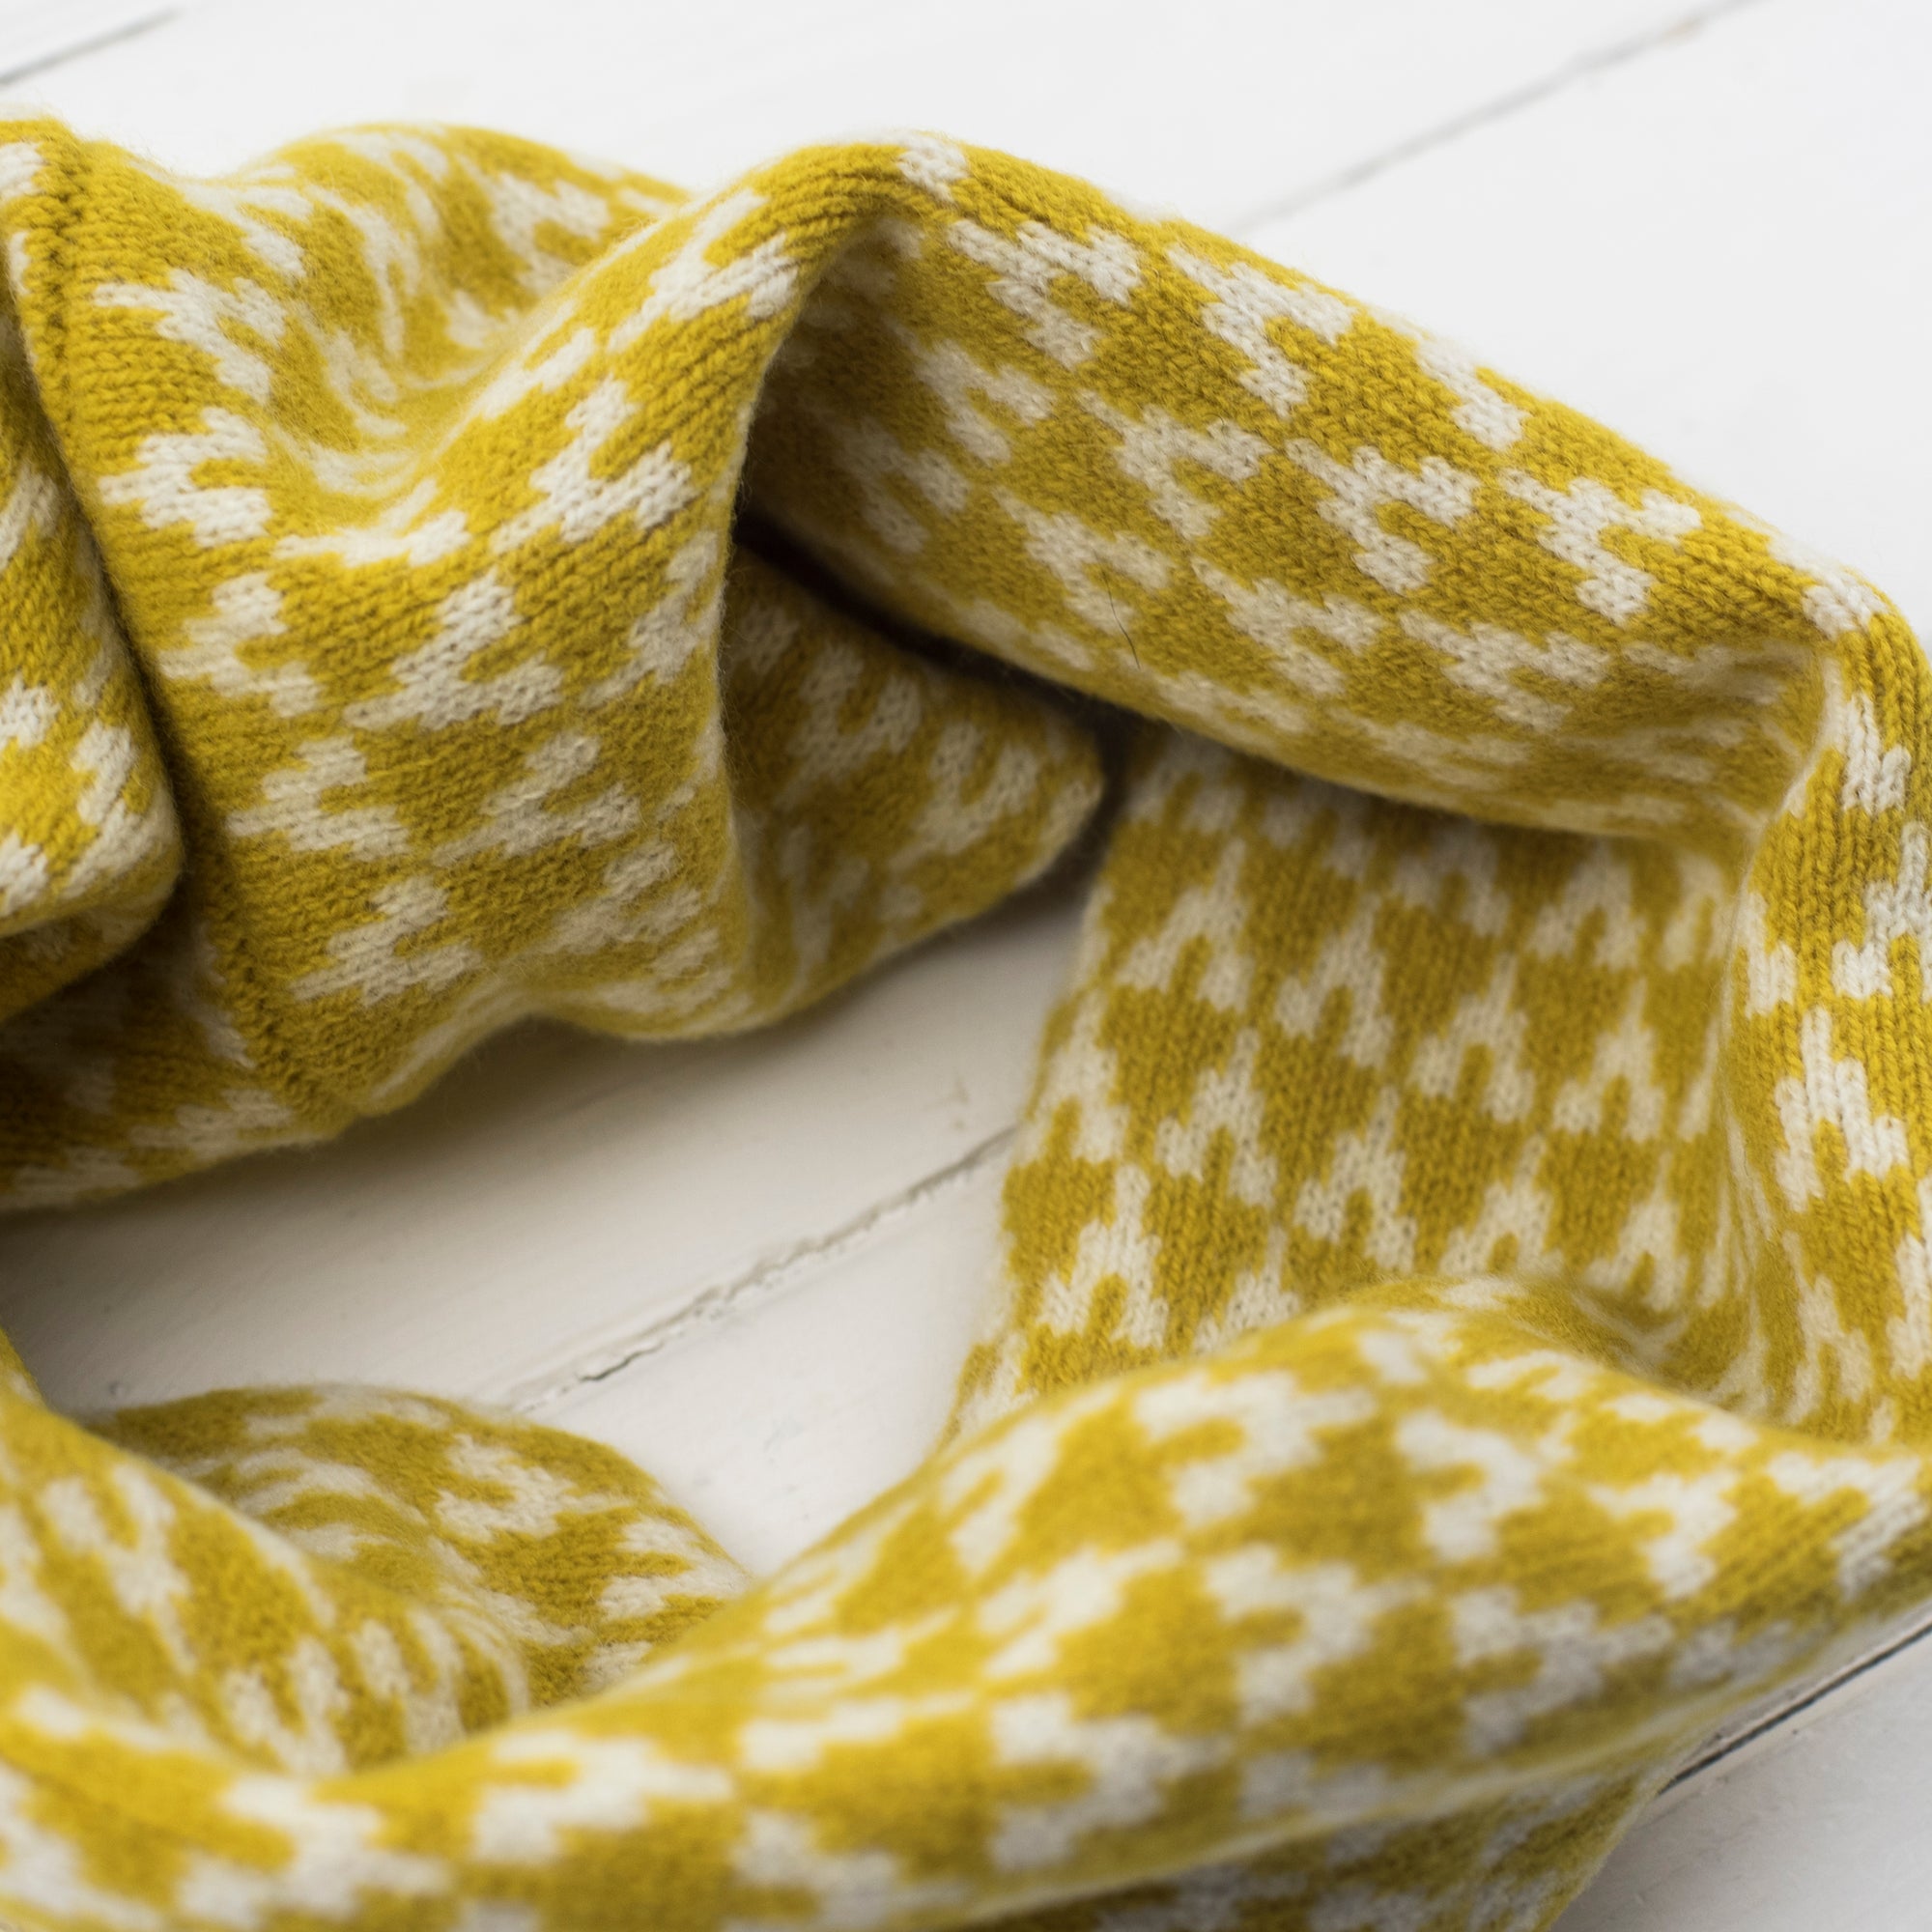 Arrow snood / cowl - piccalilli (MADE TO ORDER)